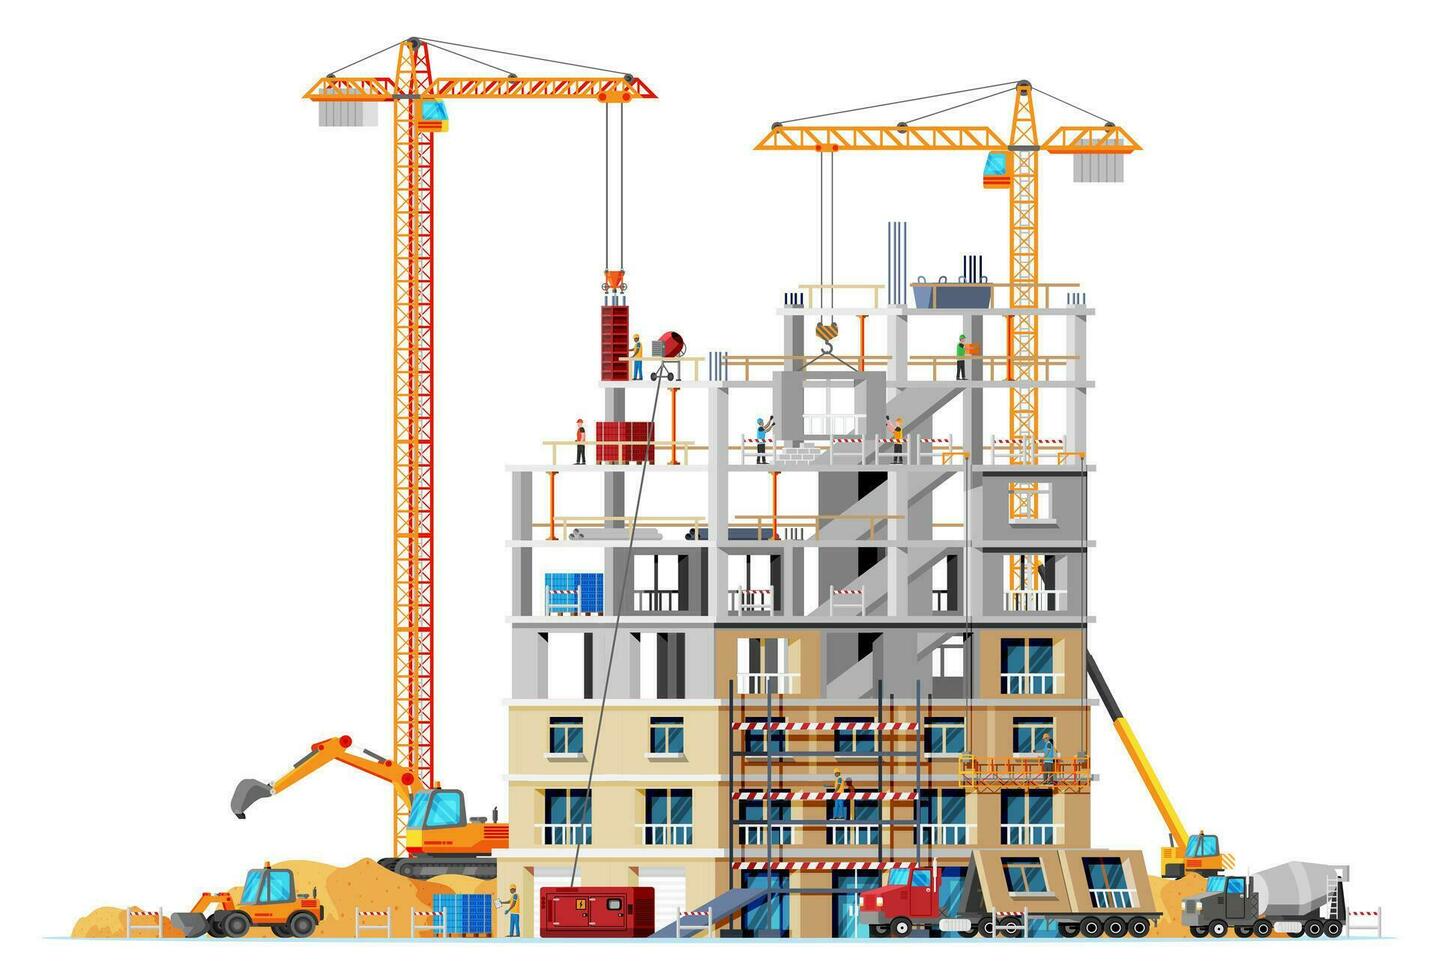 Construction Site Banner. Truck car, Workers, Concrete Piles, Tower Crane. Under Construction Design Background. Building Materials and Equipment. Cartoon Flat Vector Illustration